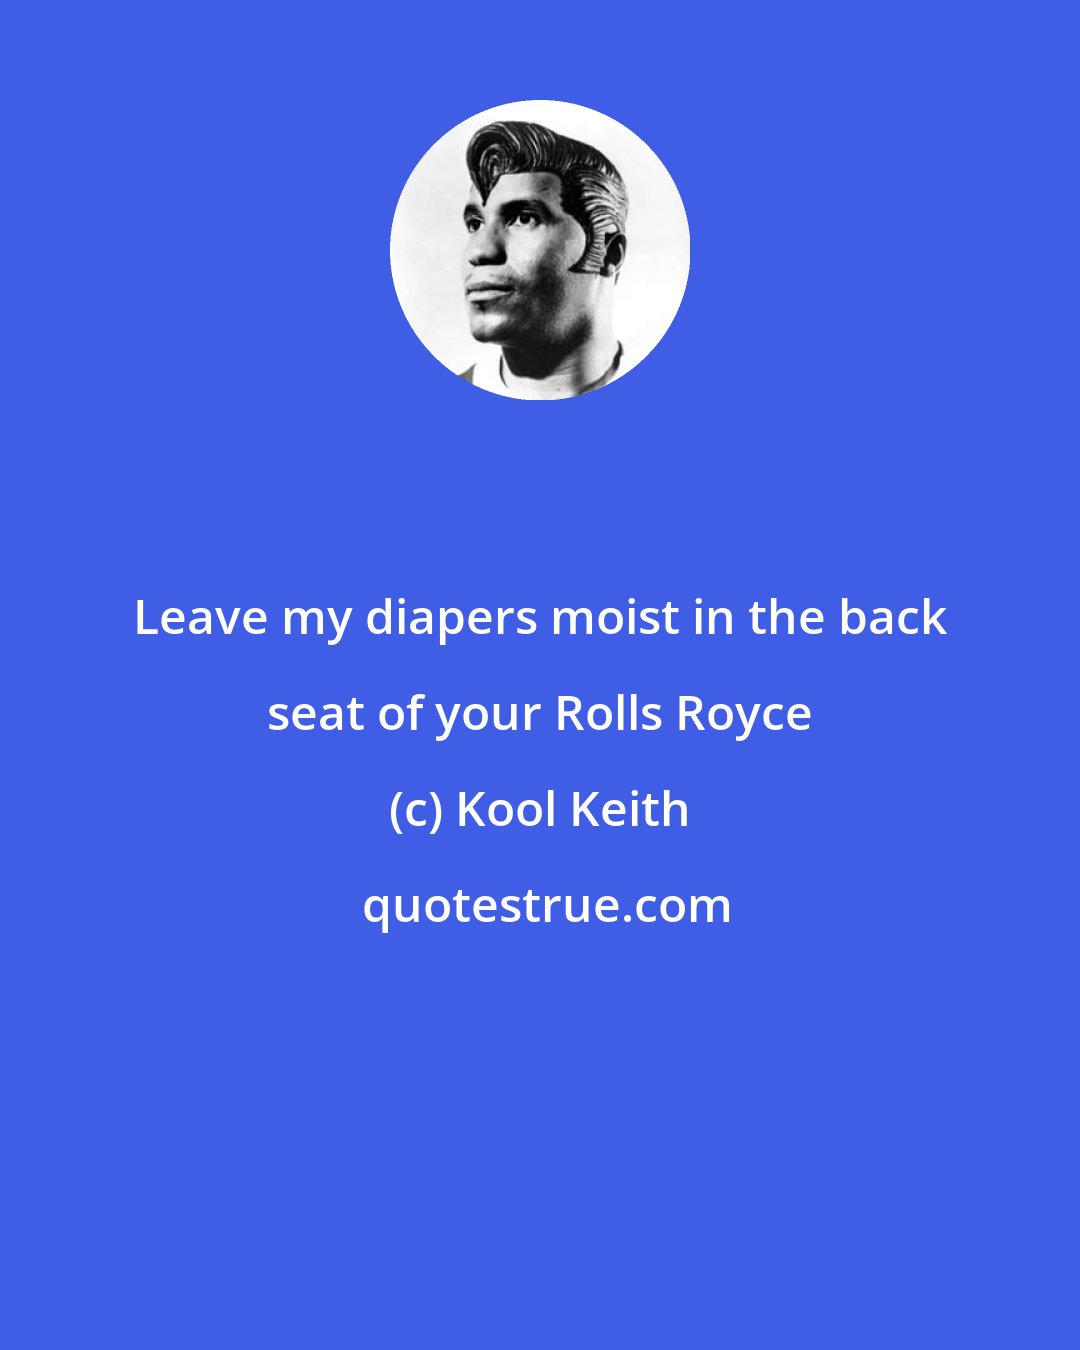 Kool Keith: Leave my diapers moist in the back seat of your Rolls Royce